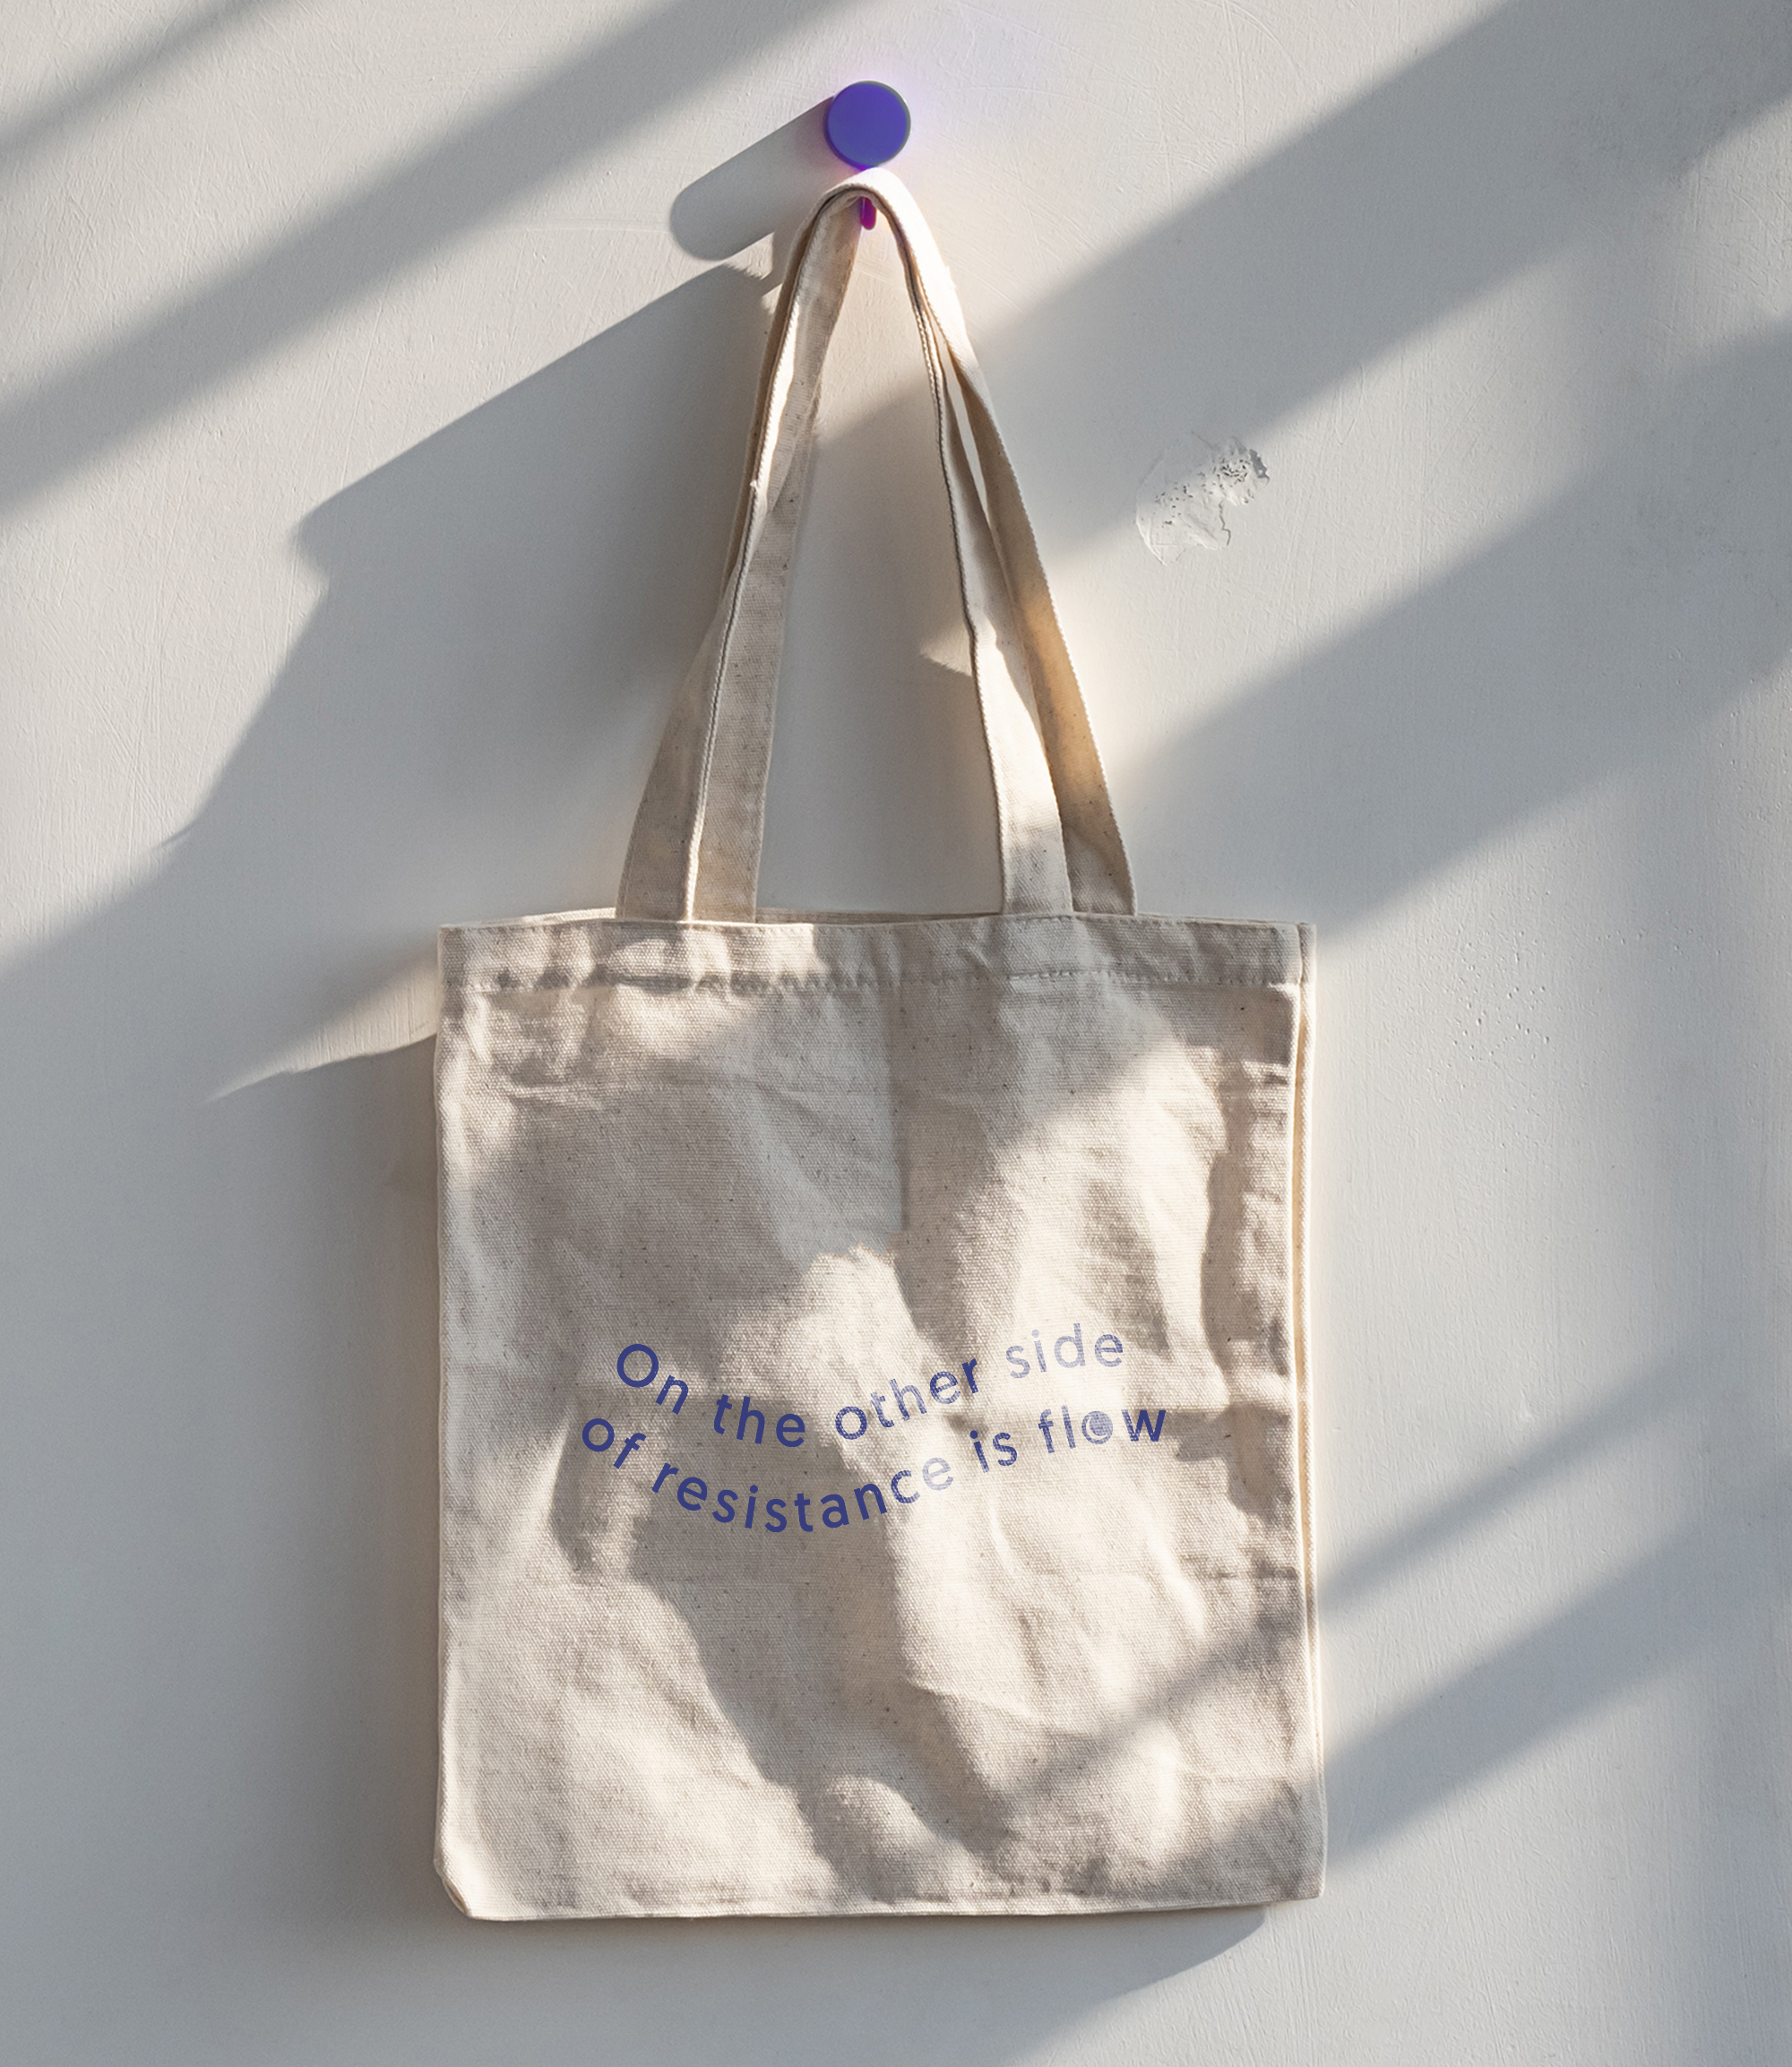 Mindful tote, by In Flow